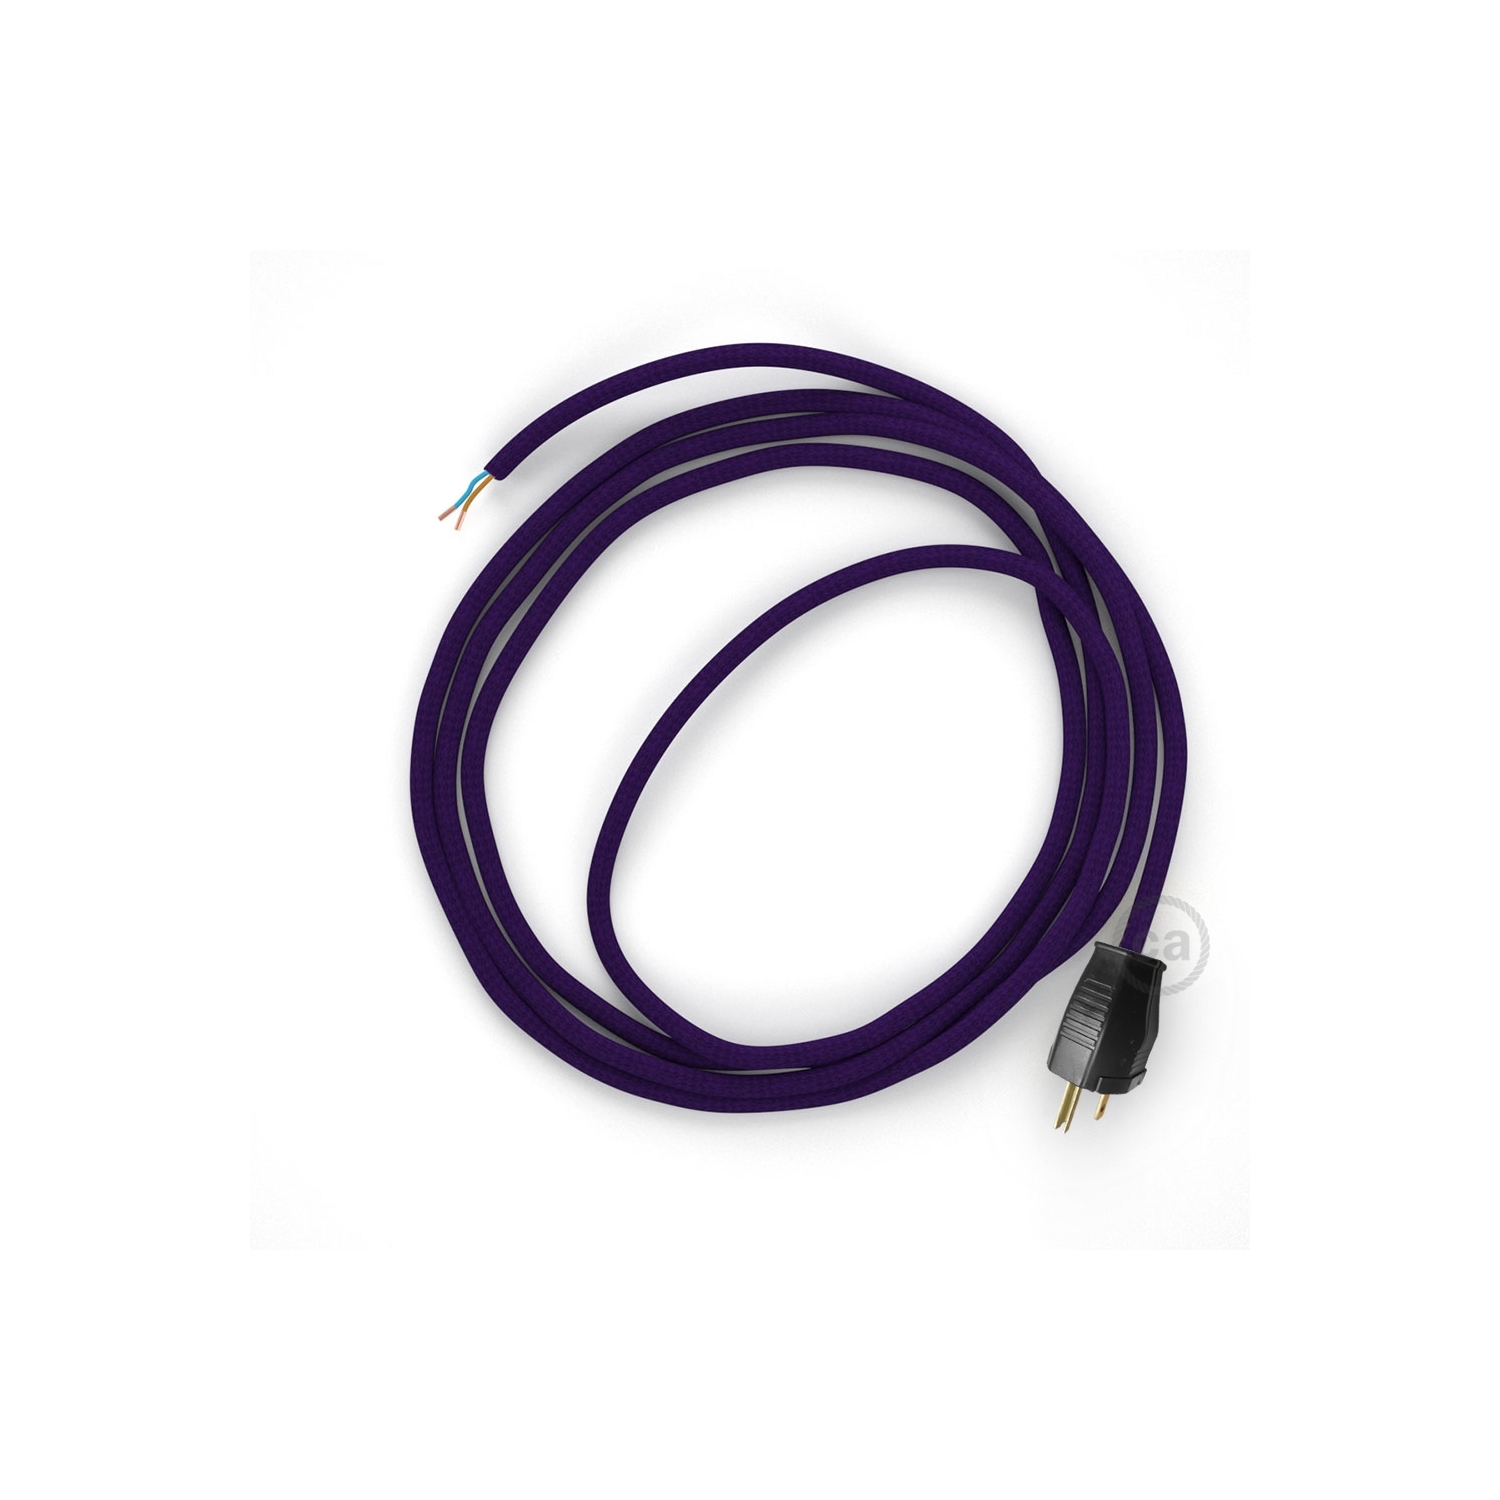 Cord-set - RM14 Violet Rayon Covered Round Cable